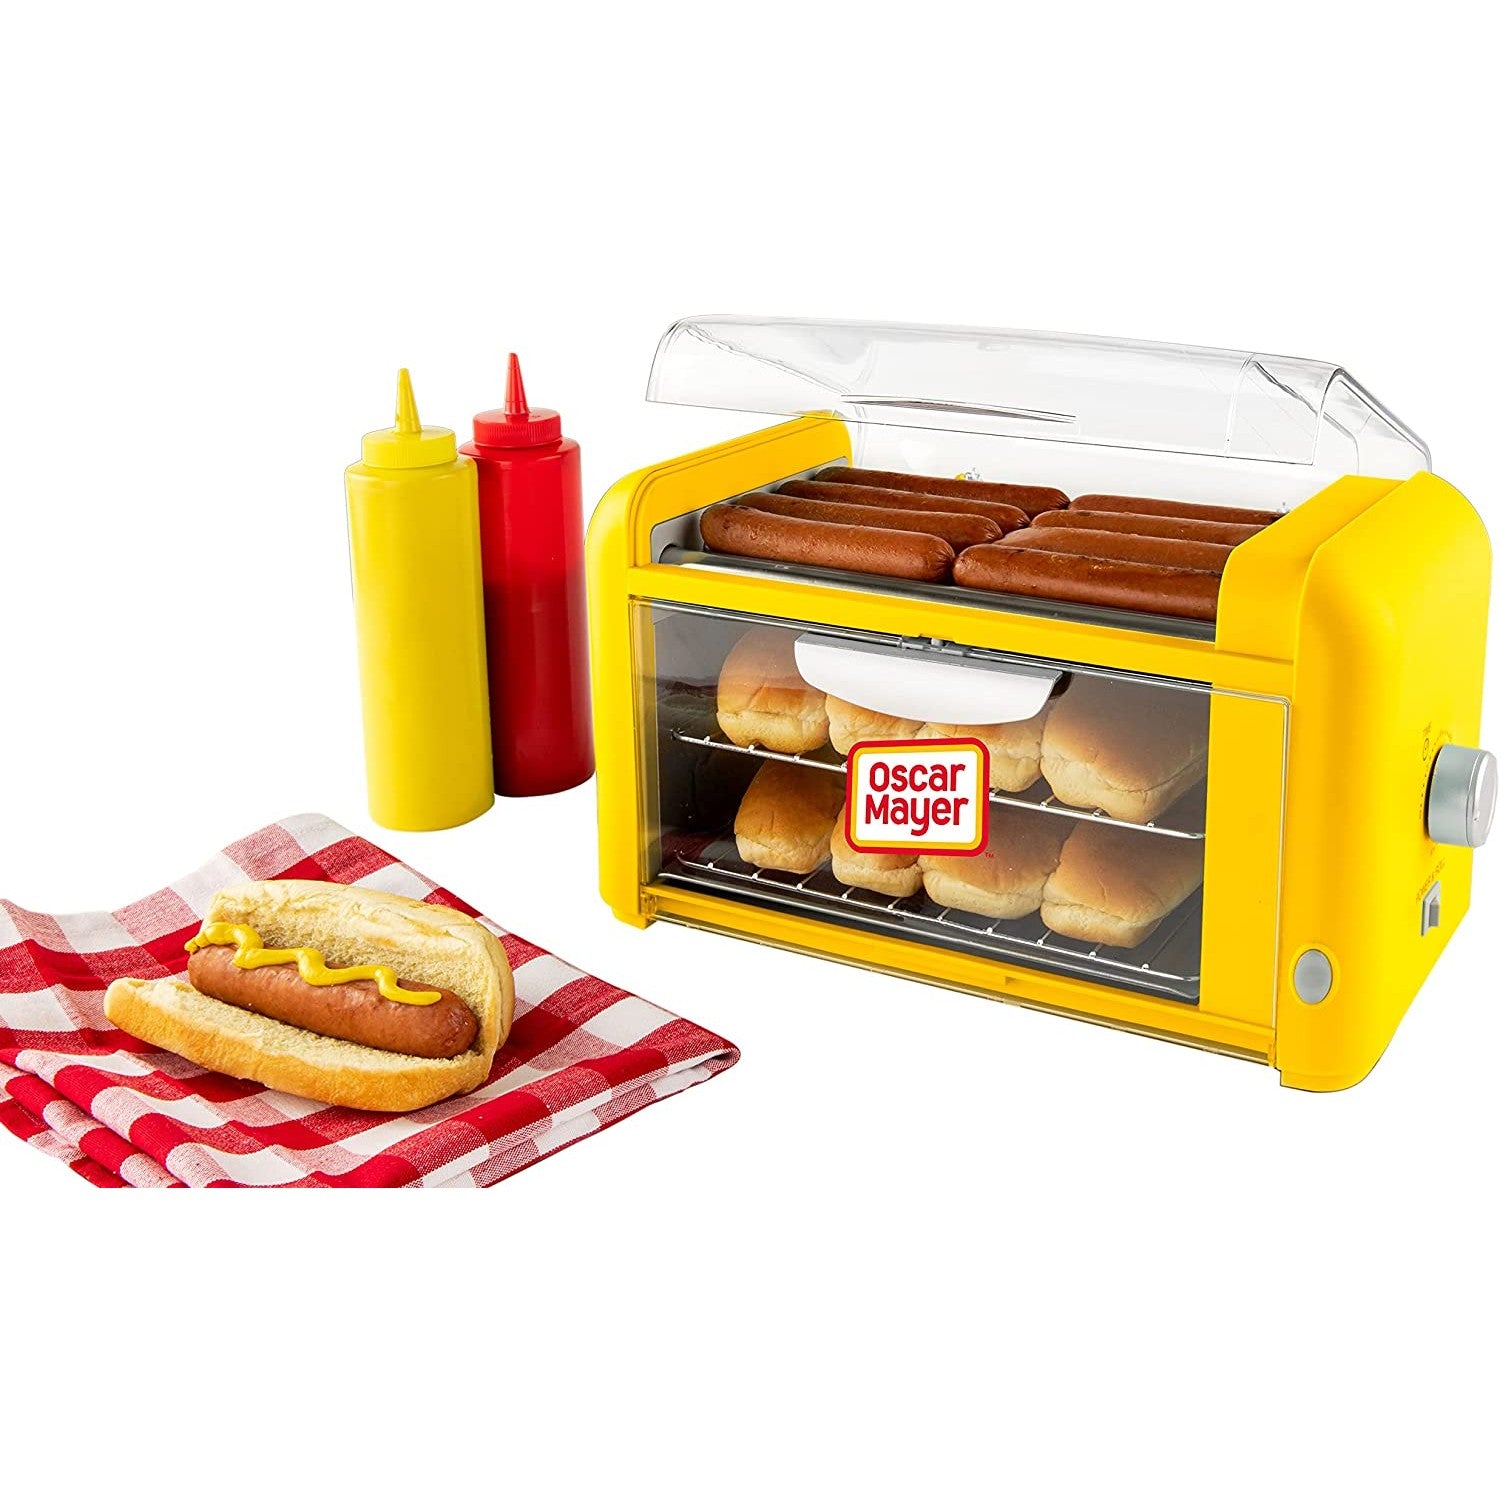 Hot dog toaster becomes harder to find